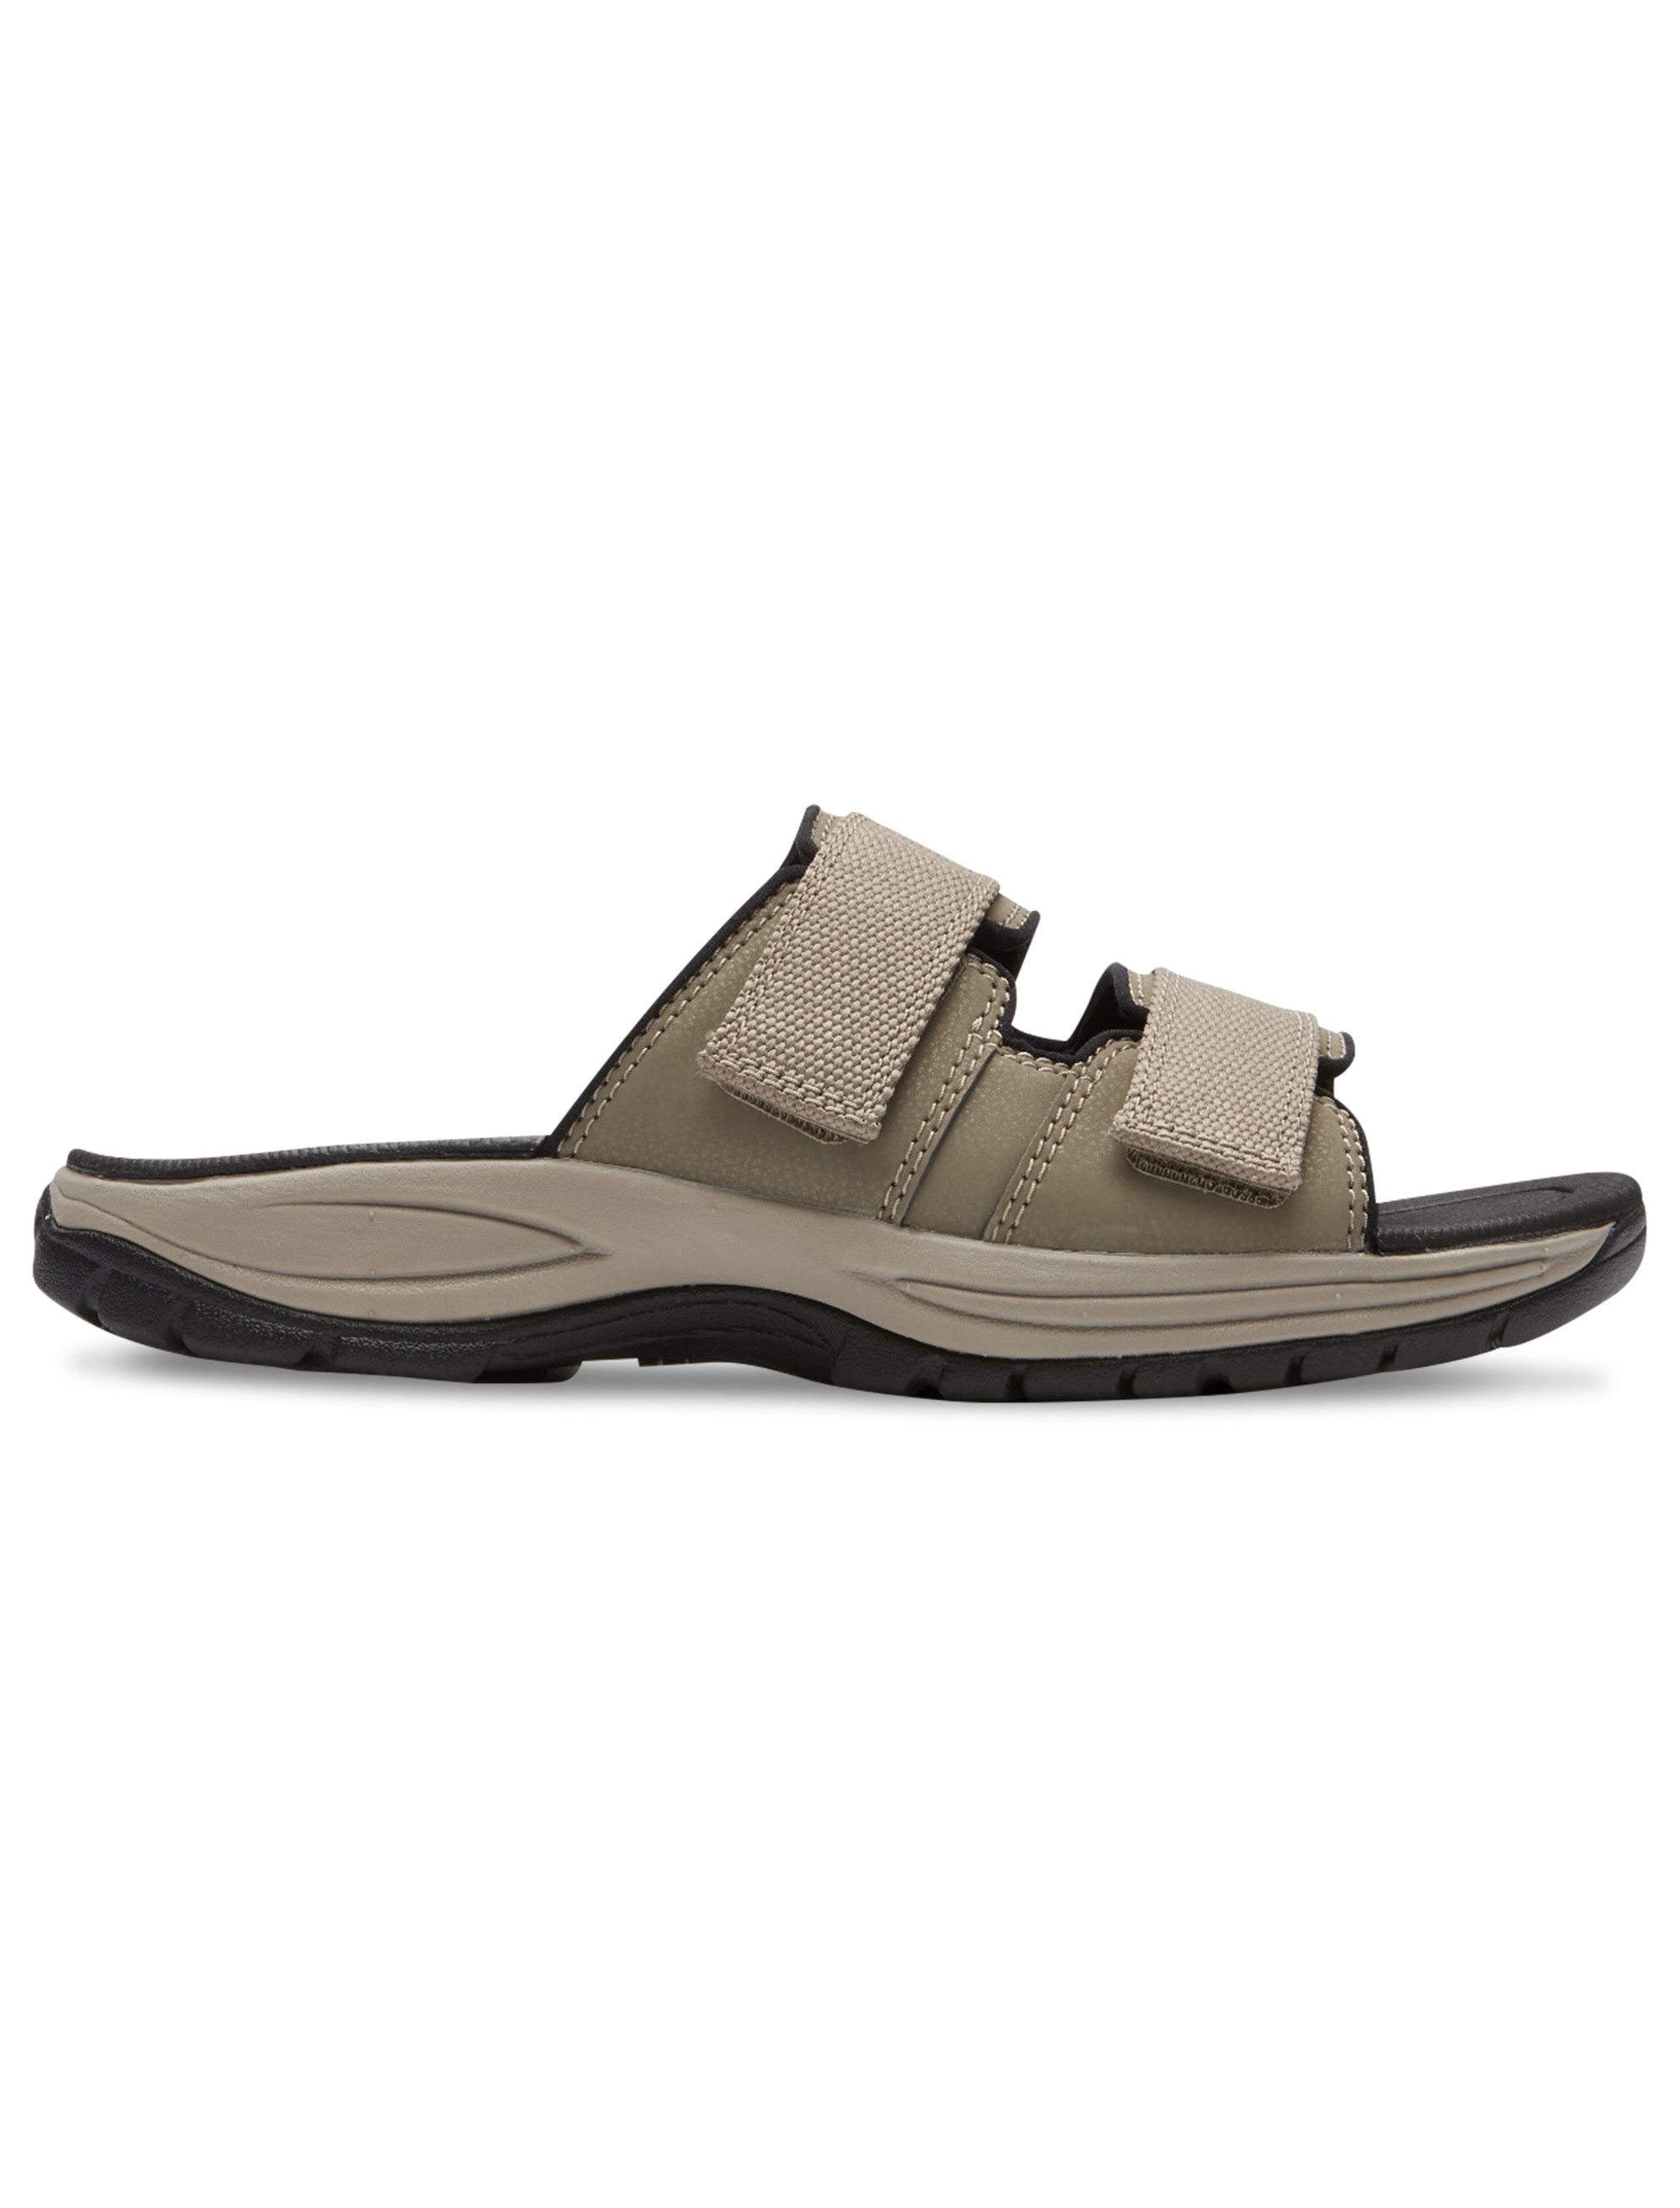 extra wide sliders mens